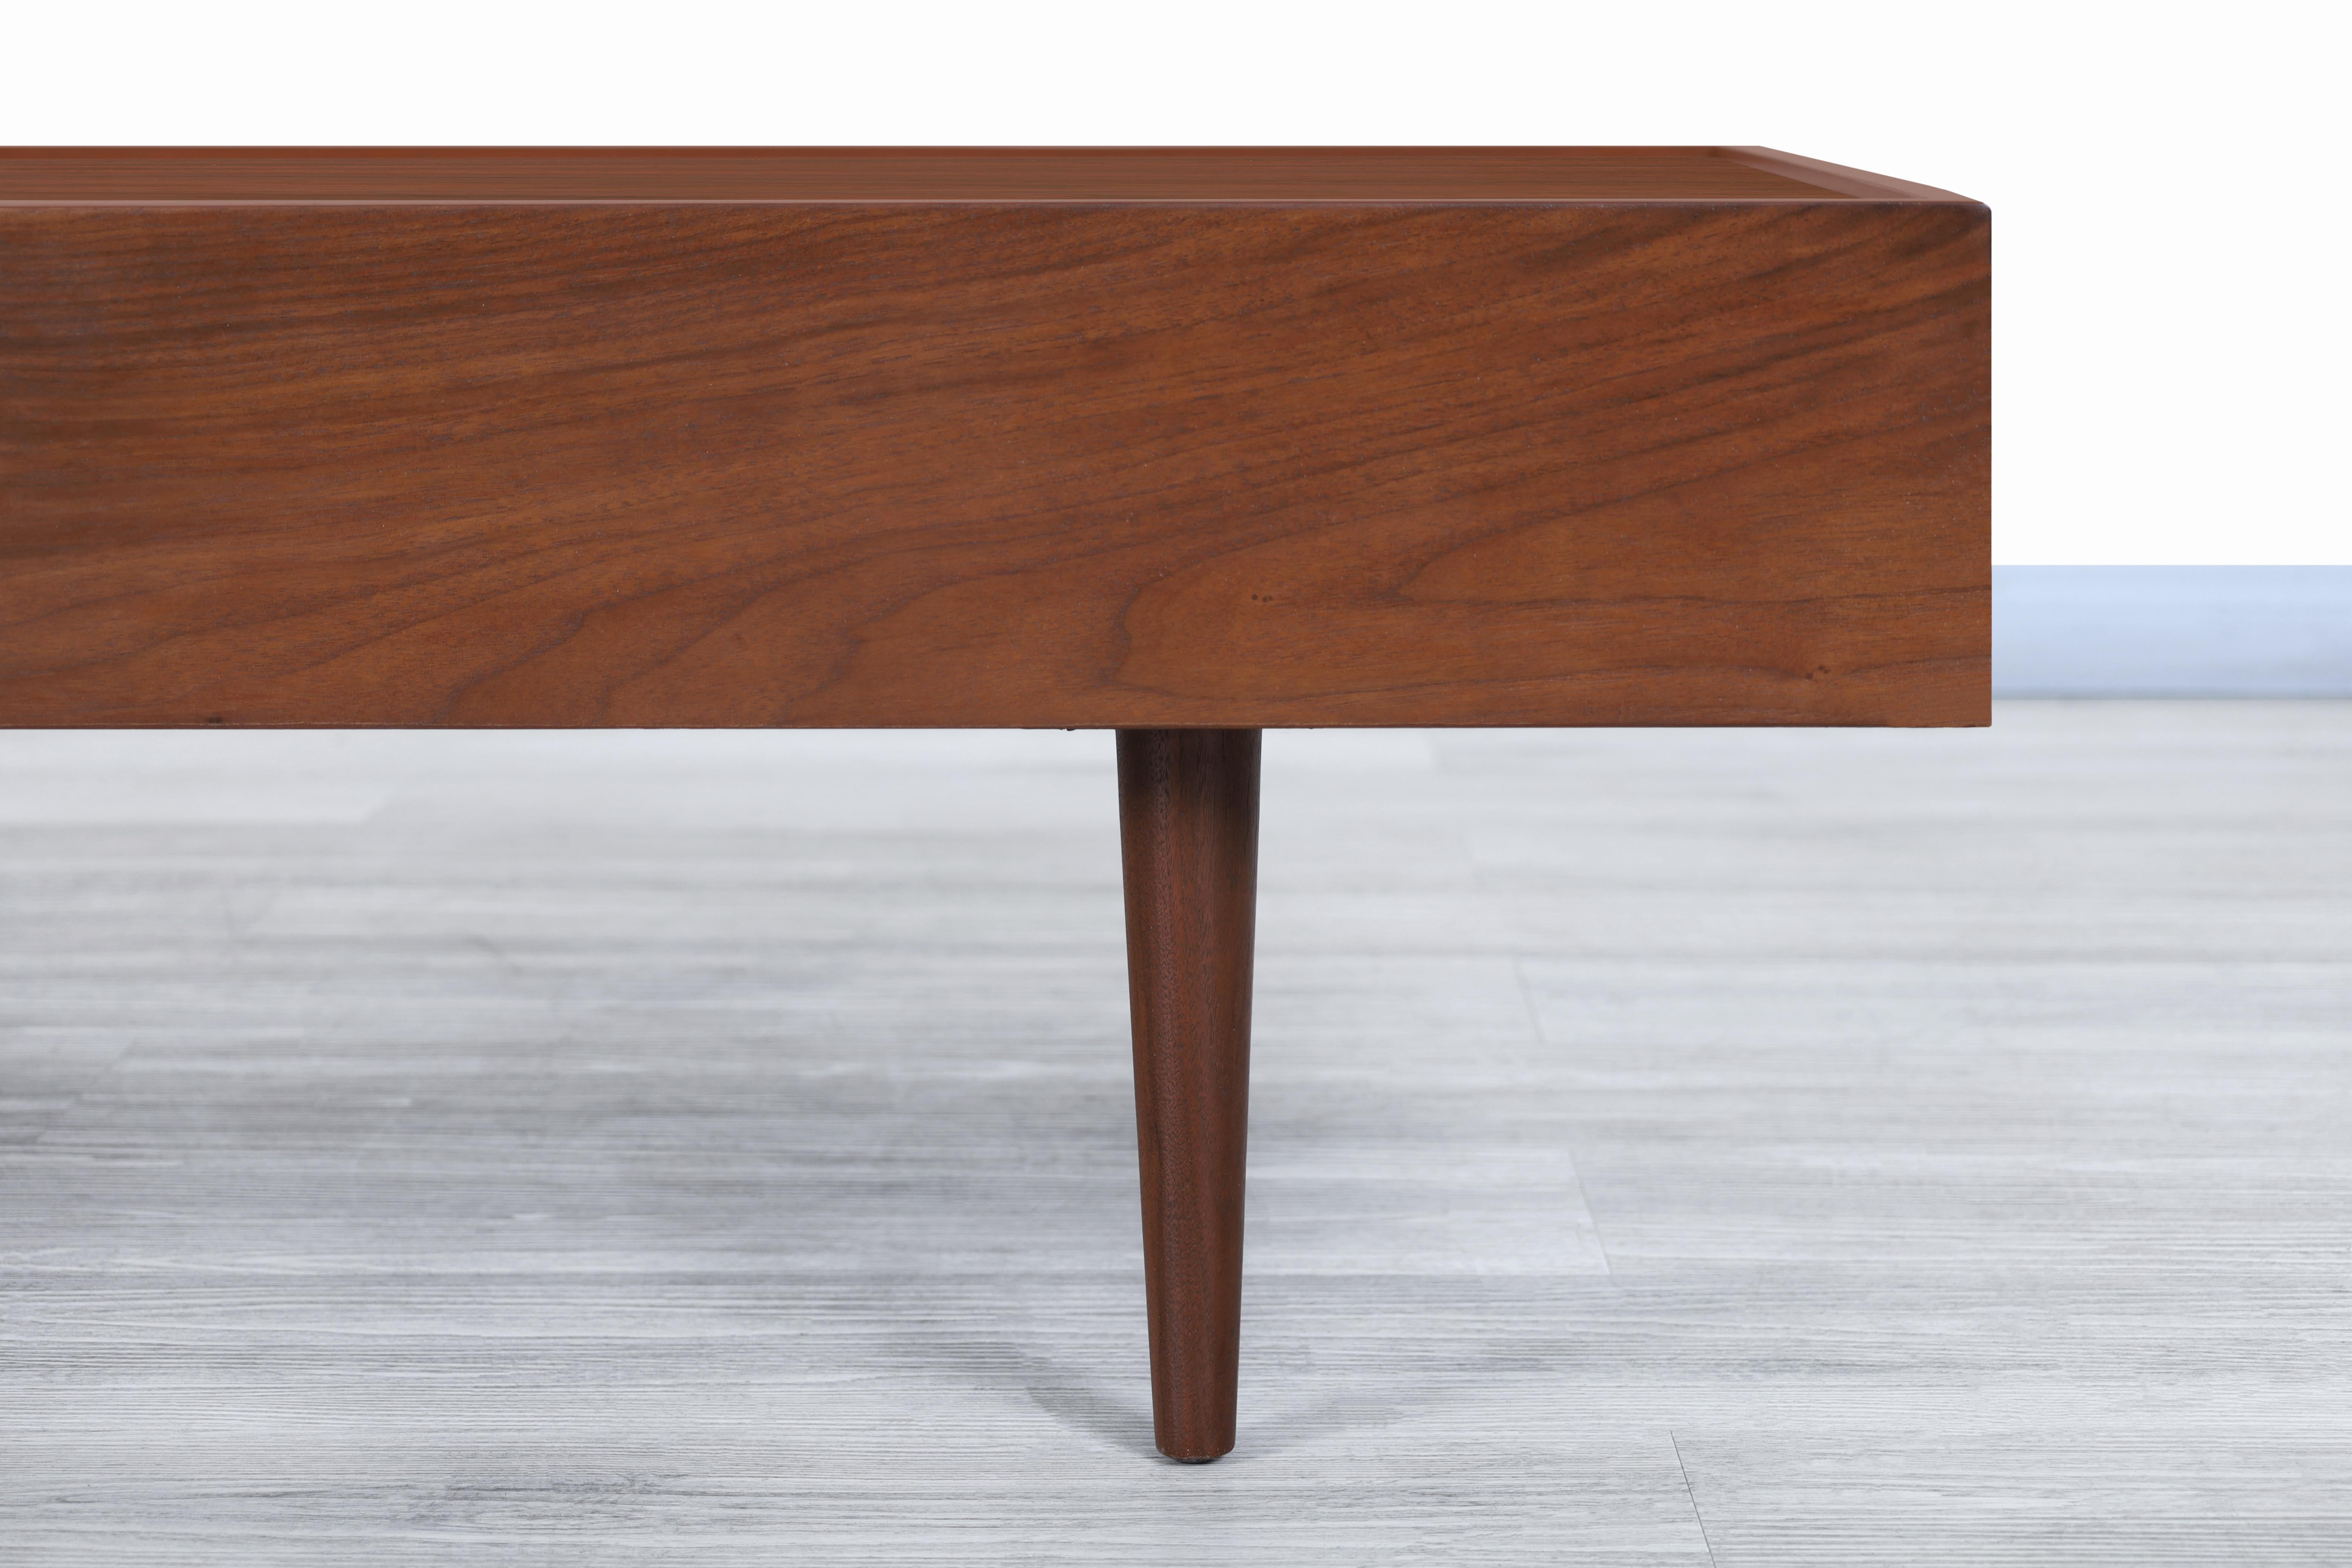 Vintage Walnut Magazine Coffee Table by Milo Baughman for Glenn of California In Excellent Condition For Sale In North Hollywood, CA